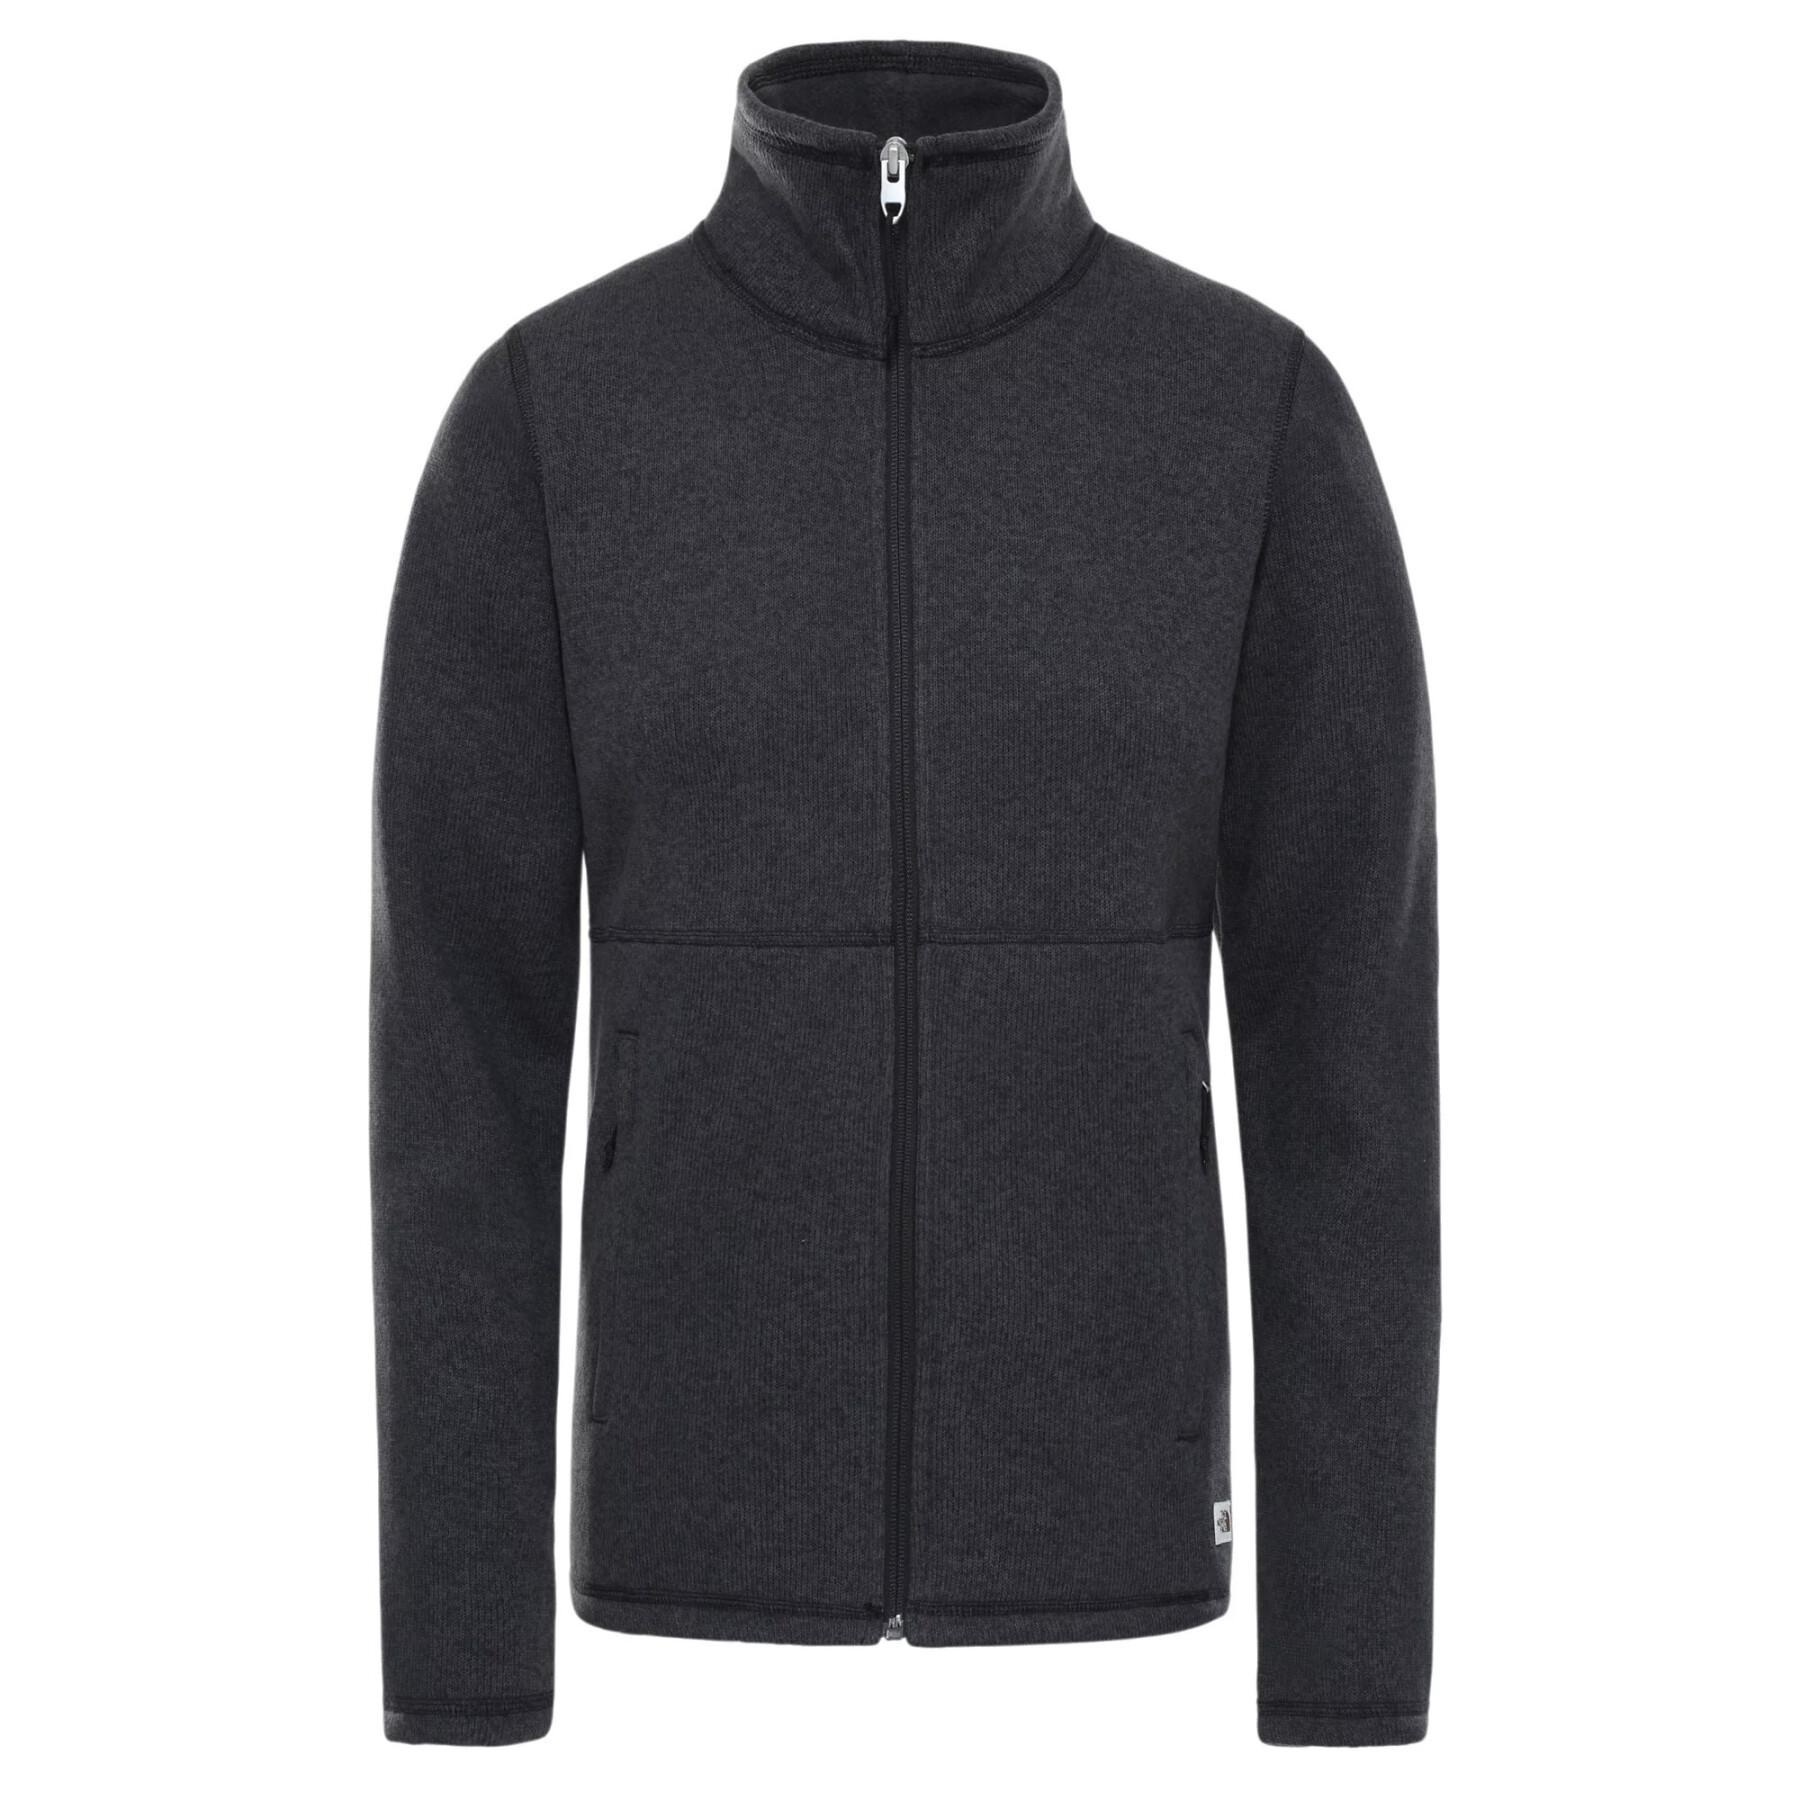 Women's full-zip jacket The North Face Crescent